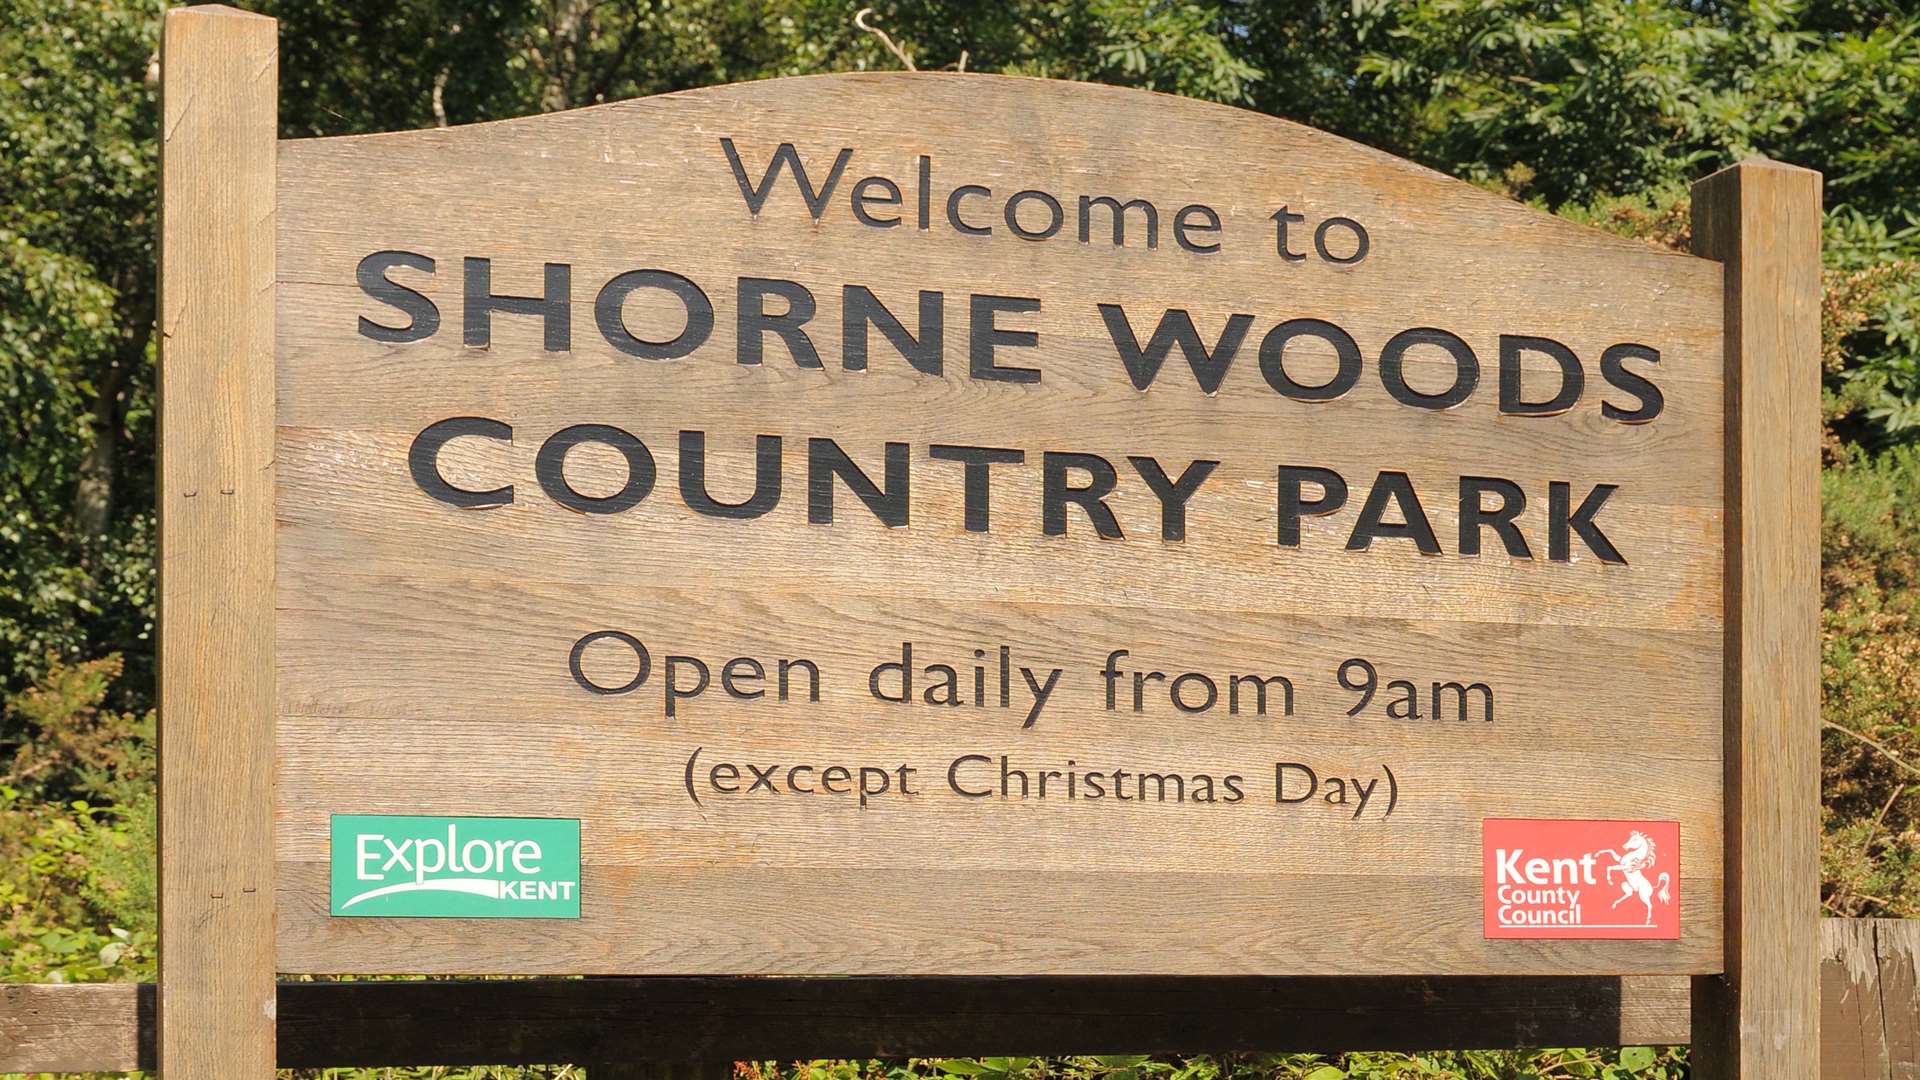 Christie was caught at Shorne Woods Country Park